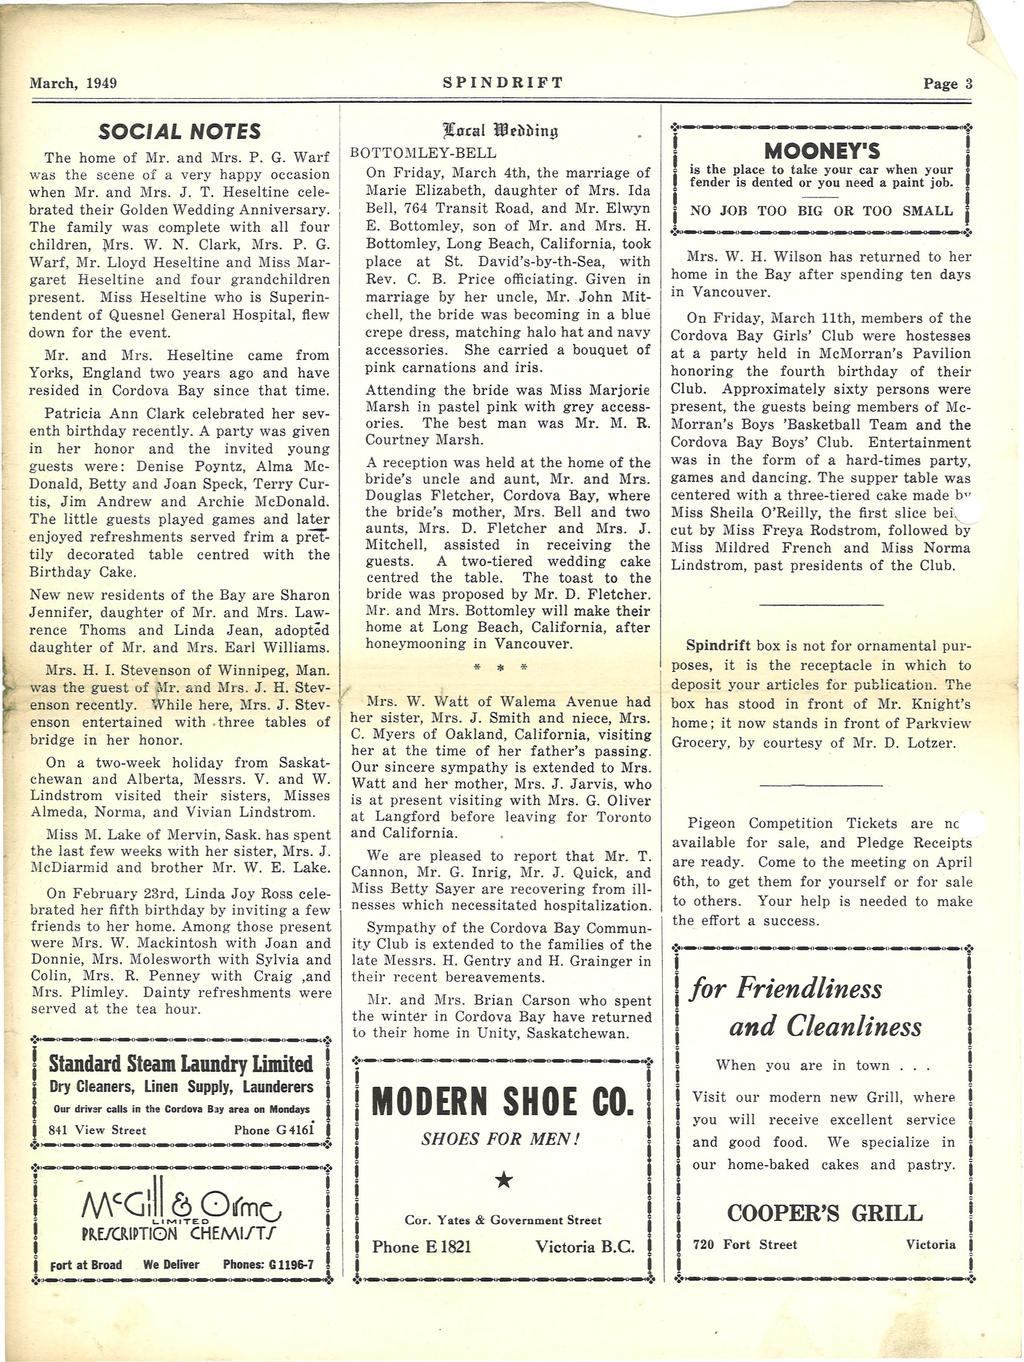 J March, 1949 SOCAL NOTES The home of Mr. and Mrs. P. G. Warf was the scene or a very happy occason when Mr. and Mrs. J. T. Heseltne celebrated ther Golden Weddng Annversary.